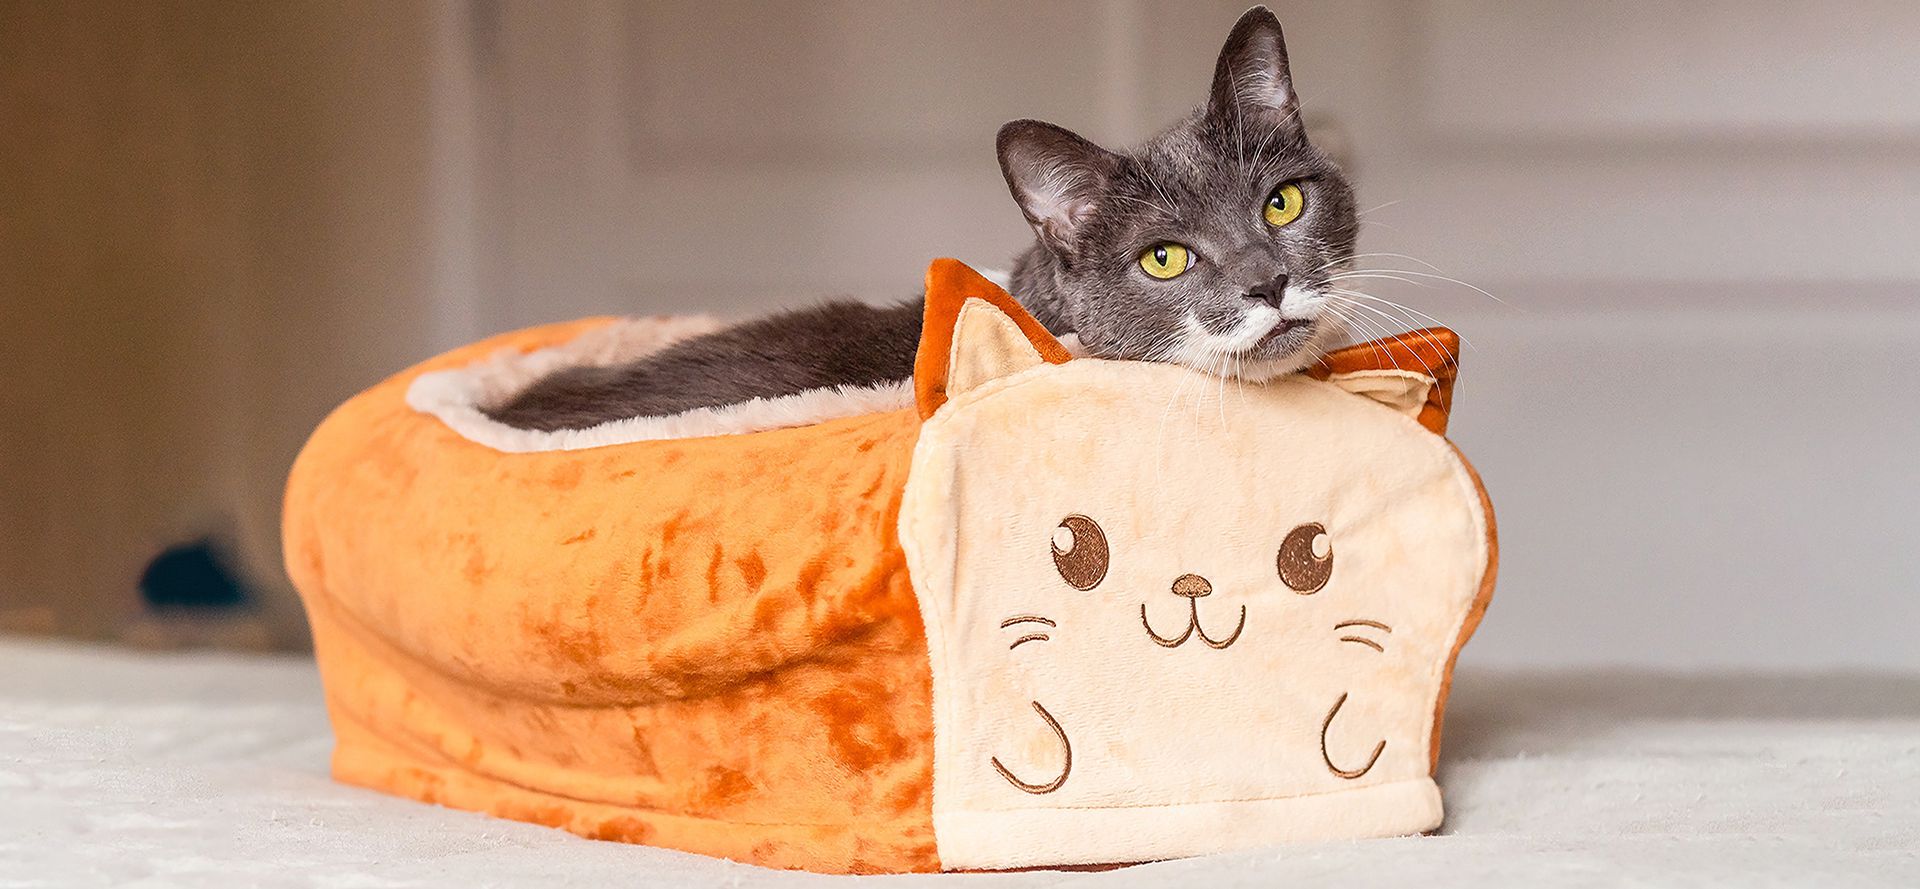 Cat lies in the bed for the cat in the form of bread.